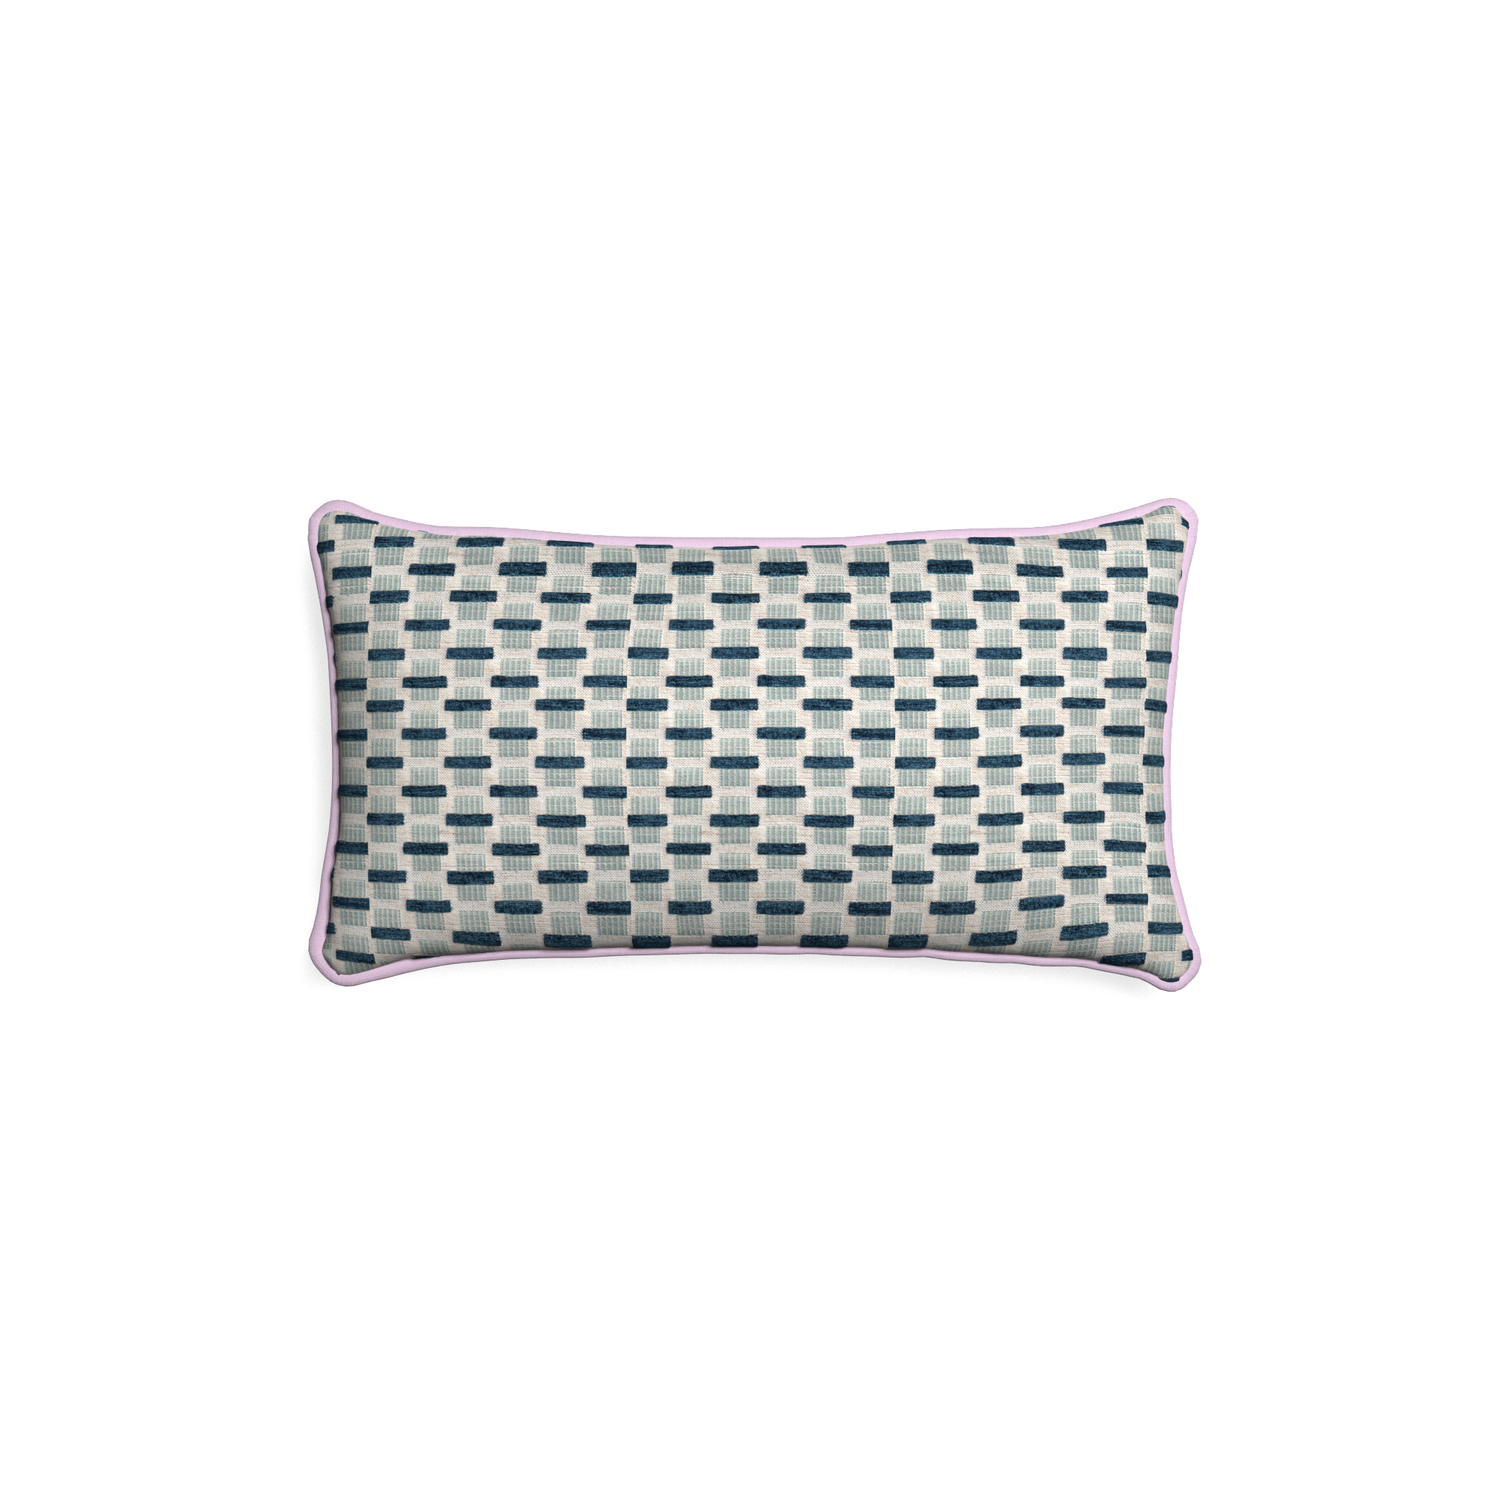 Petite-lumbar willow amalfi custom blue geometric chenillepillow with l piping on white background